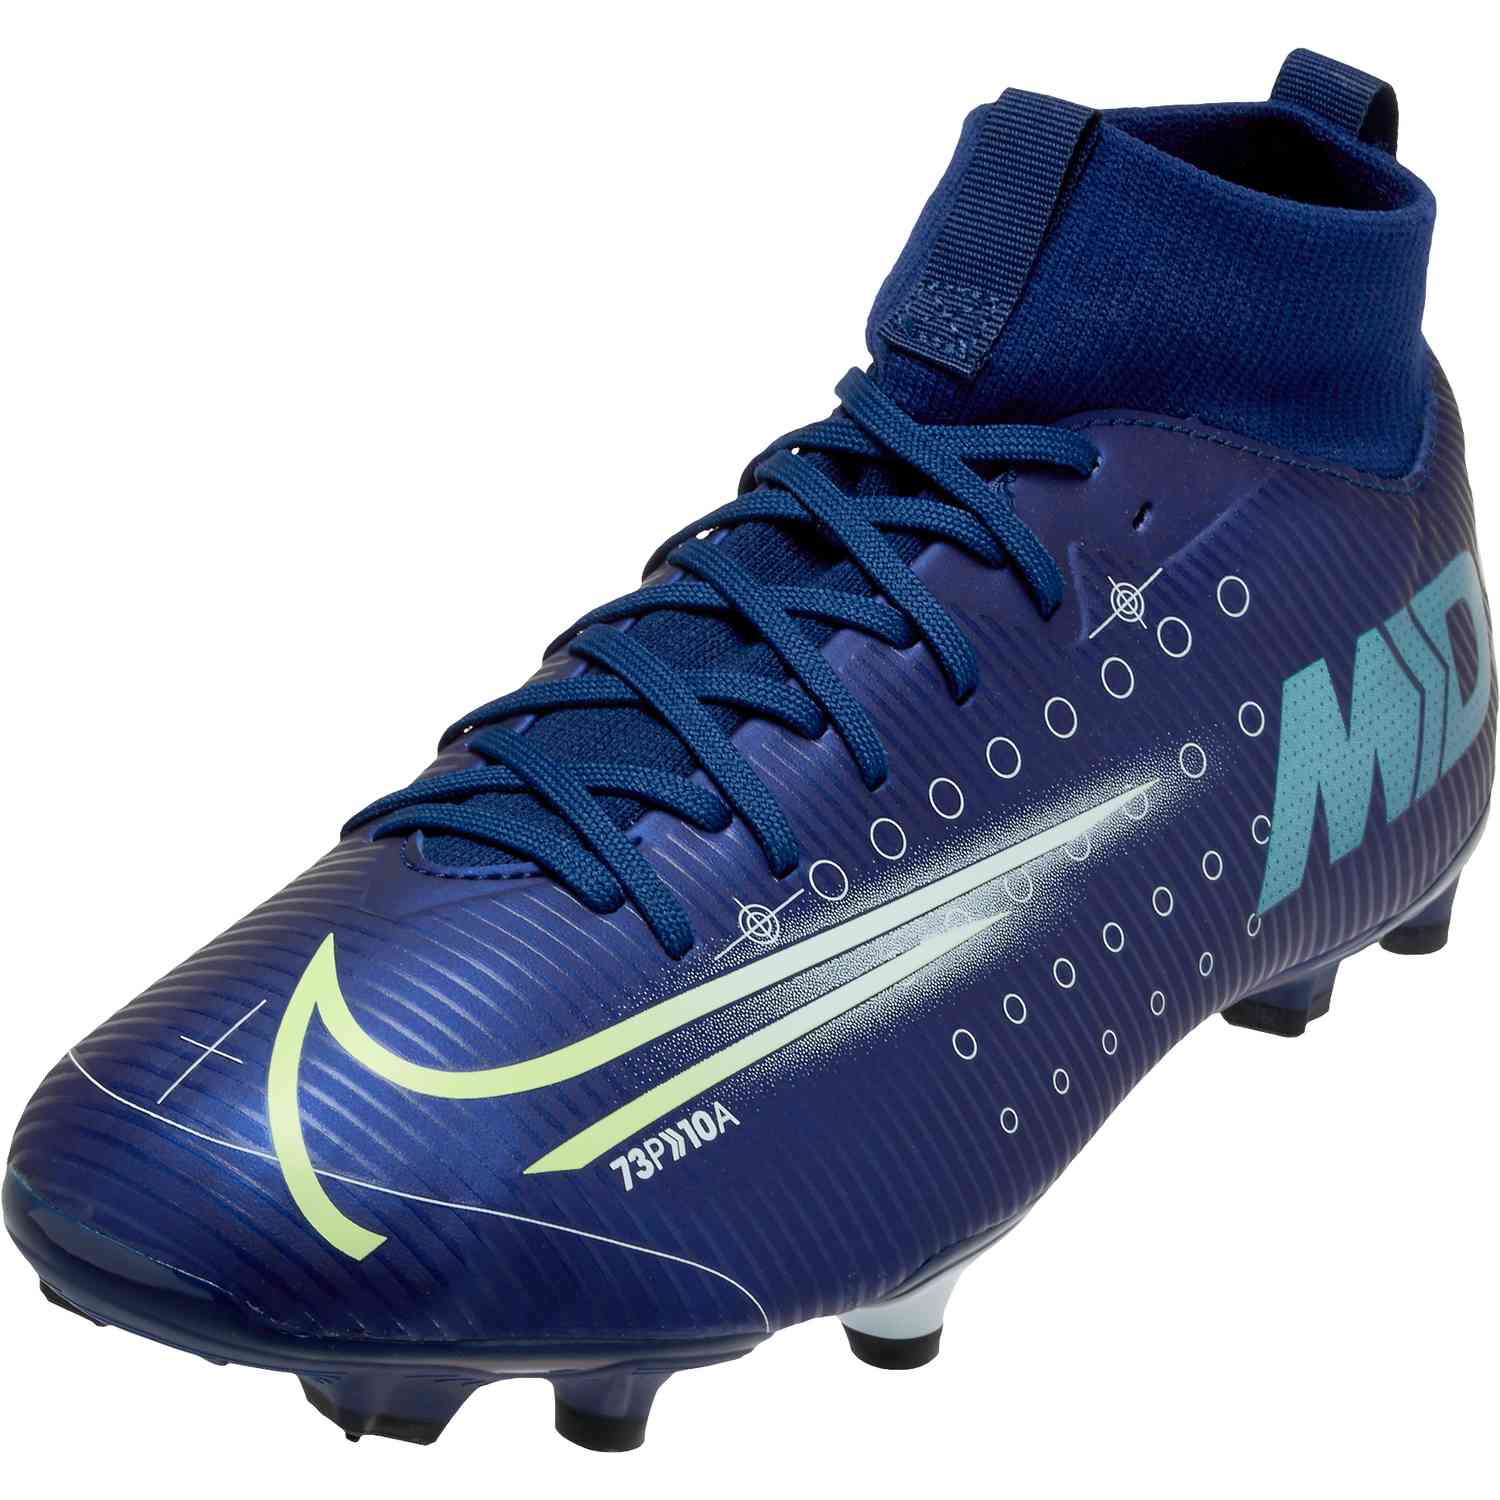 NIKE Mercurial Superfly 6 Academy FG MG Soccer Cleats.